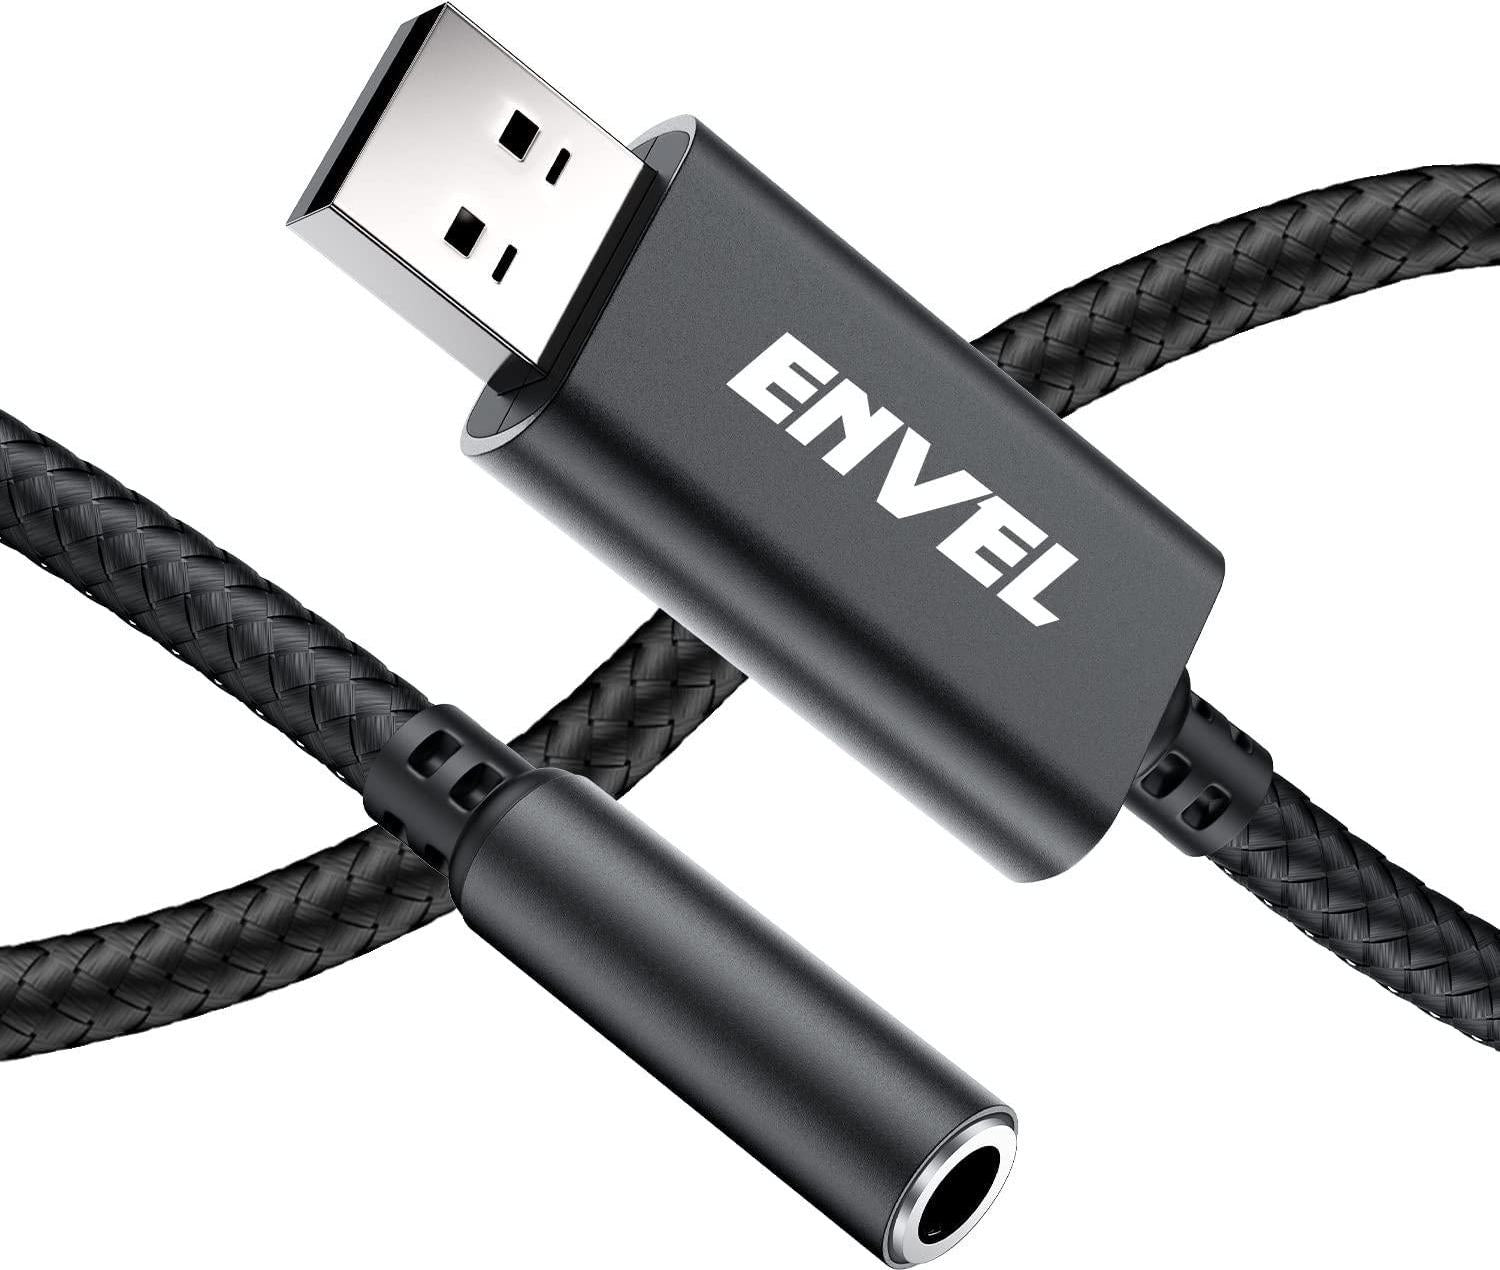 ENVEL, ENVEL USB to 3.5mm Jack Audio Adapter,USB to AUX,External Stereo Sound Card for PS4/PS5/PC/Laptop, Headphone Adapter with Built-in Chip TRRS 4-Pole Mic-Supported